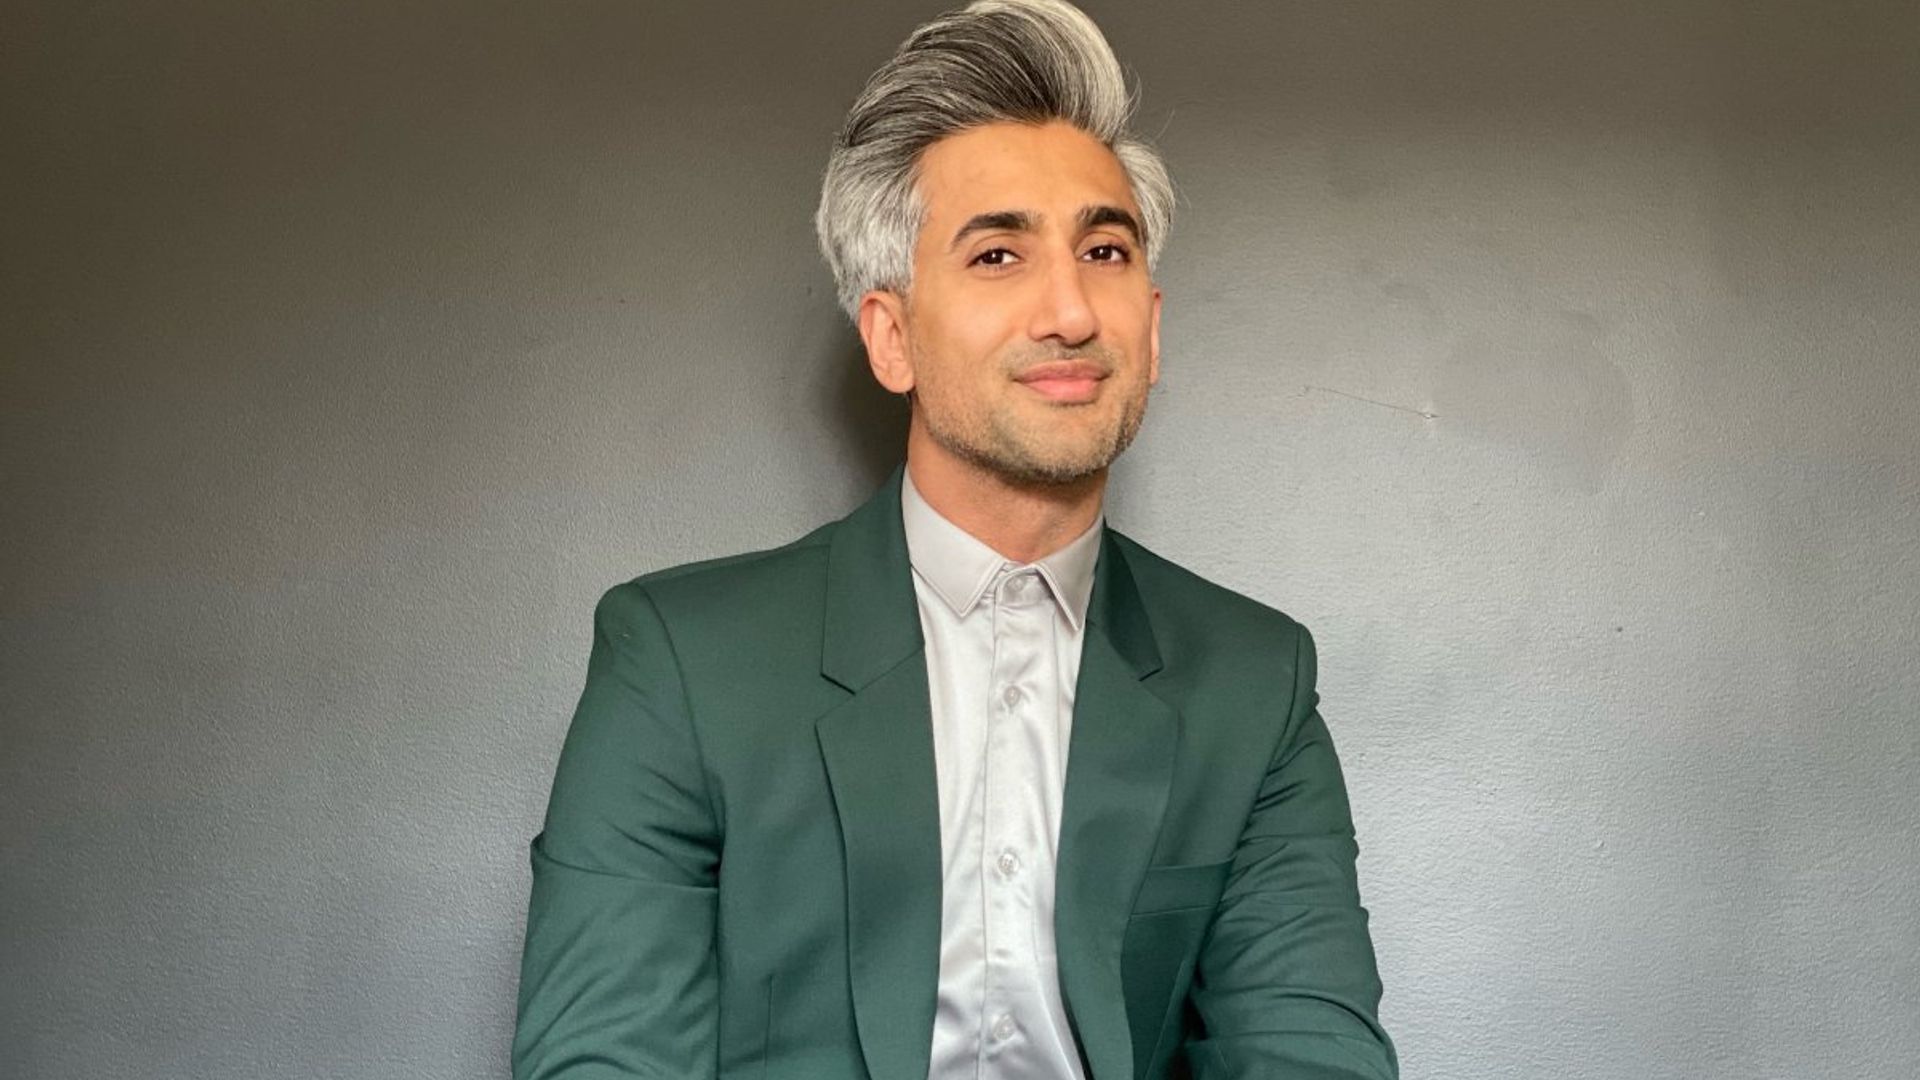 Queer Eye's Tan France reveals eight fashion principles to live by